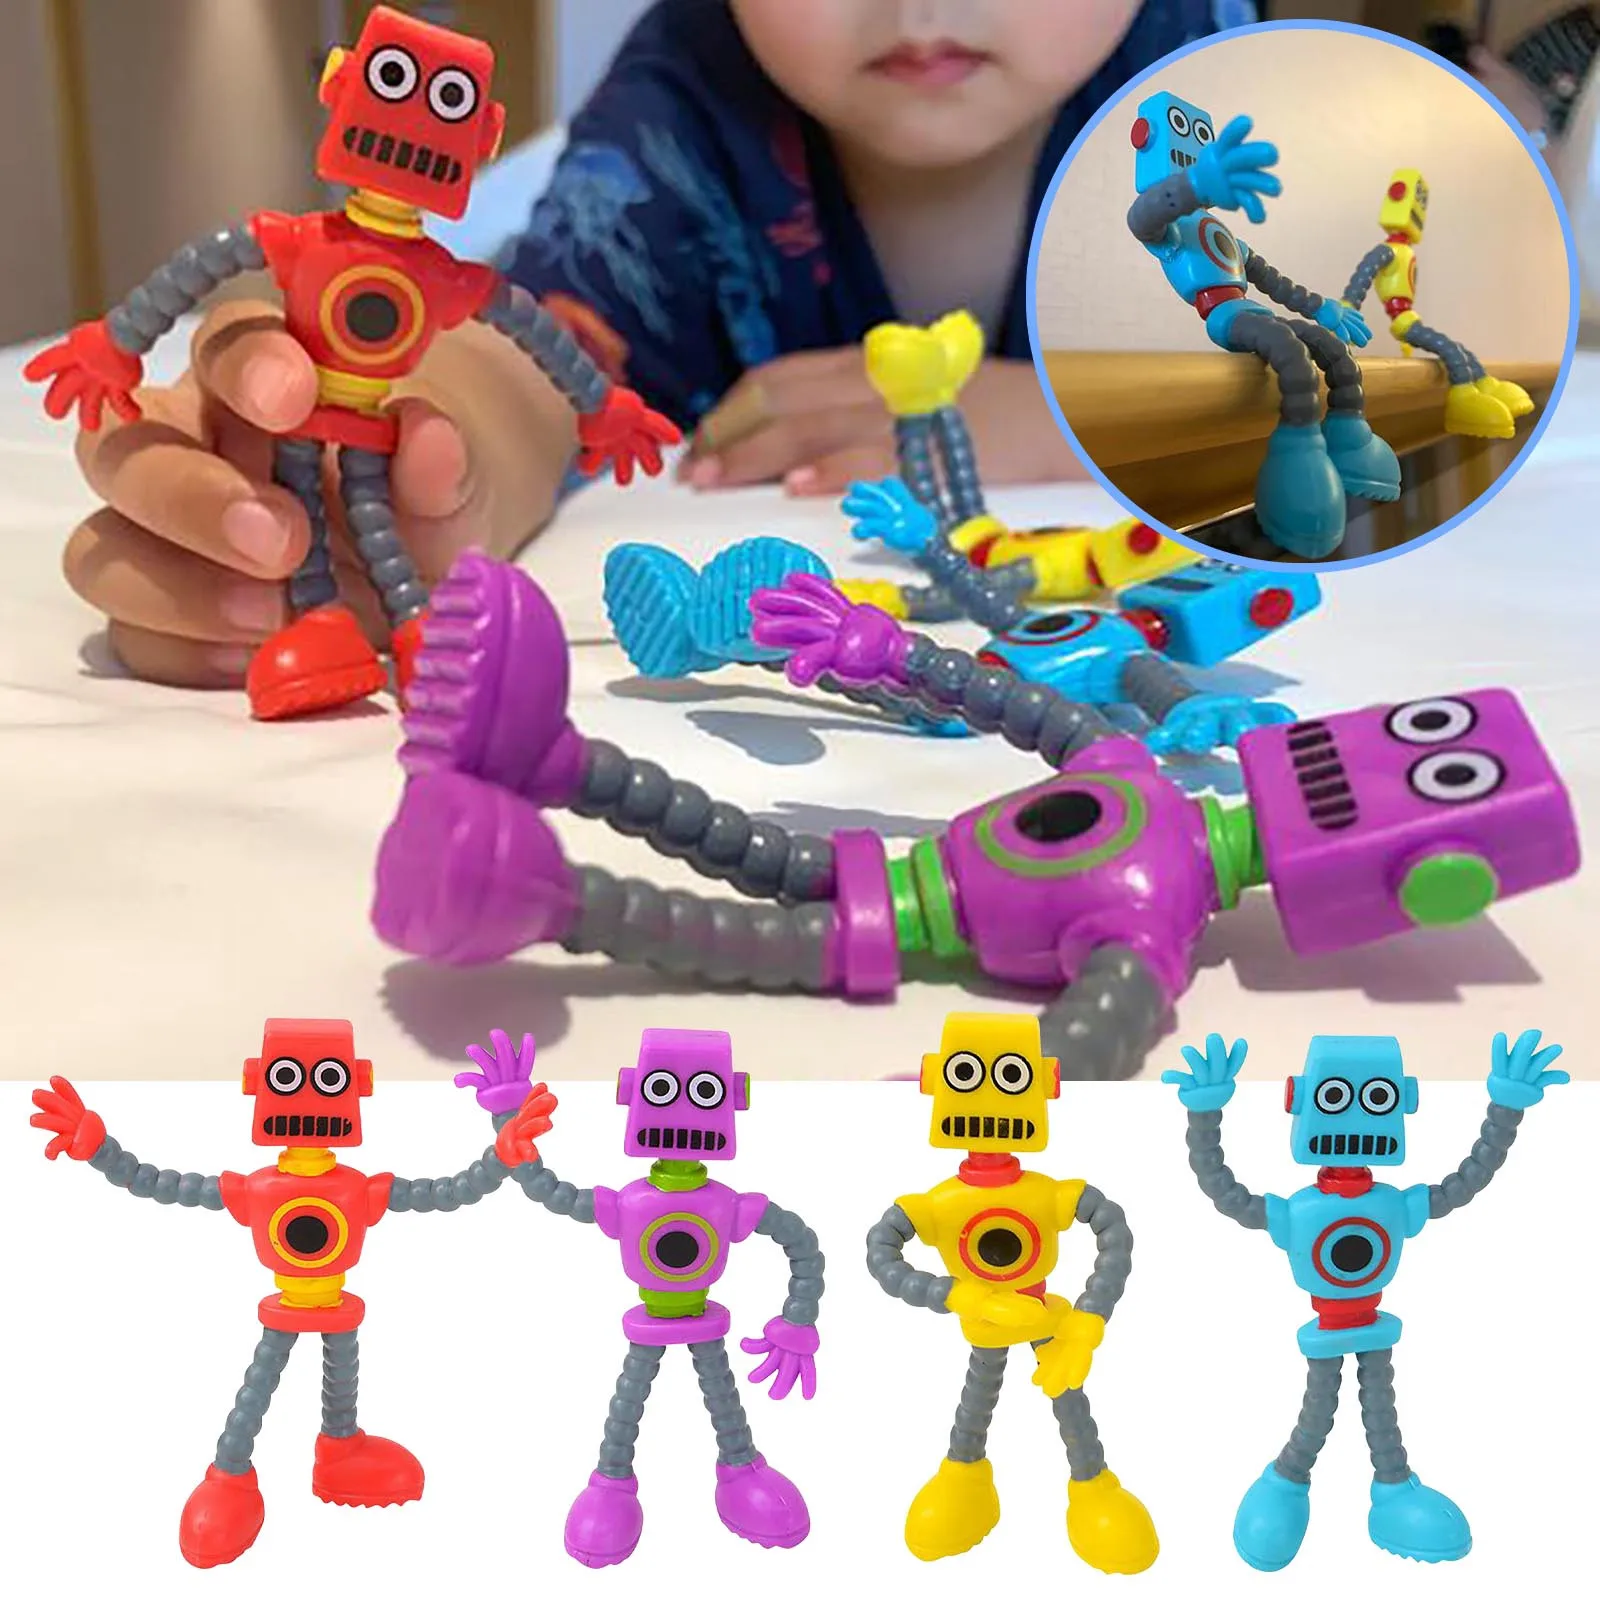 Robot Funny Sensory Toy For Kids Adults,13×13cm Twisted And Deformed Doll Decompression Tricky Toy,Creative Wire Robot Toy Decompression Deformed Top Spiral Decompression Toy Between Fingers 